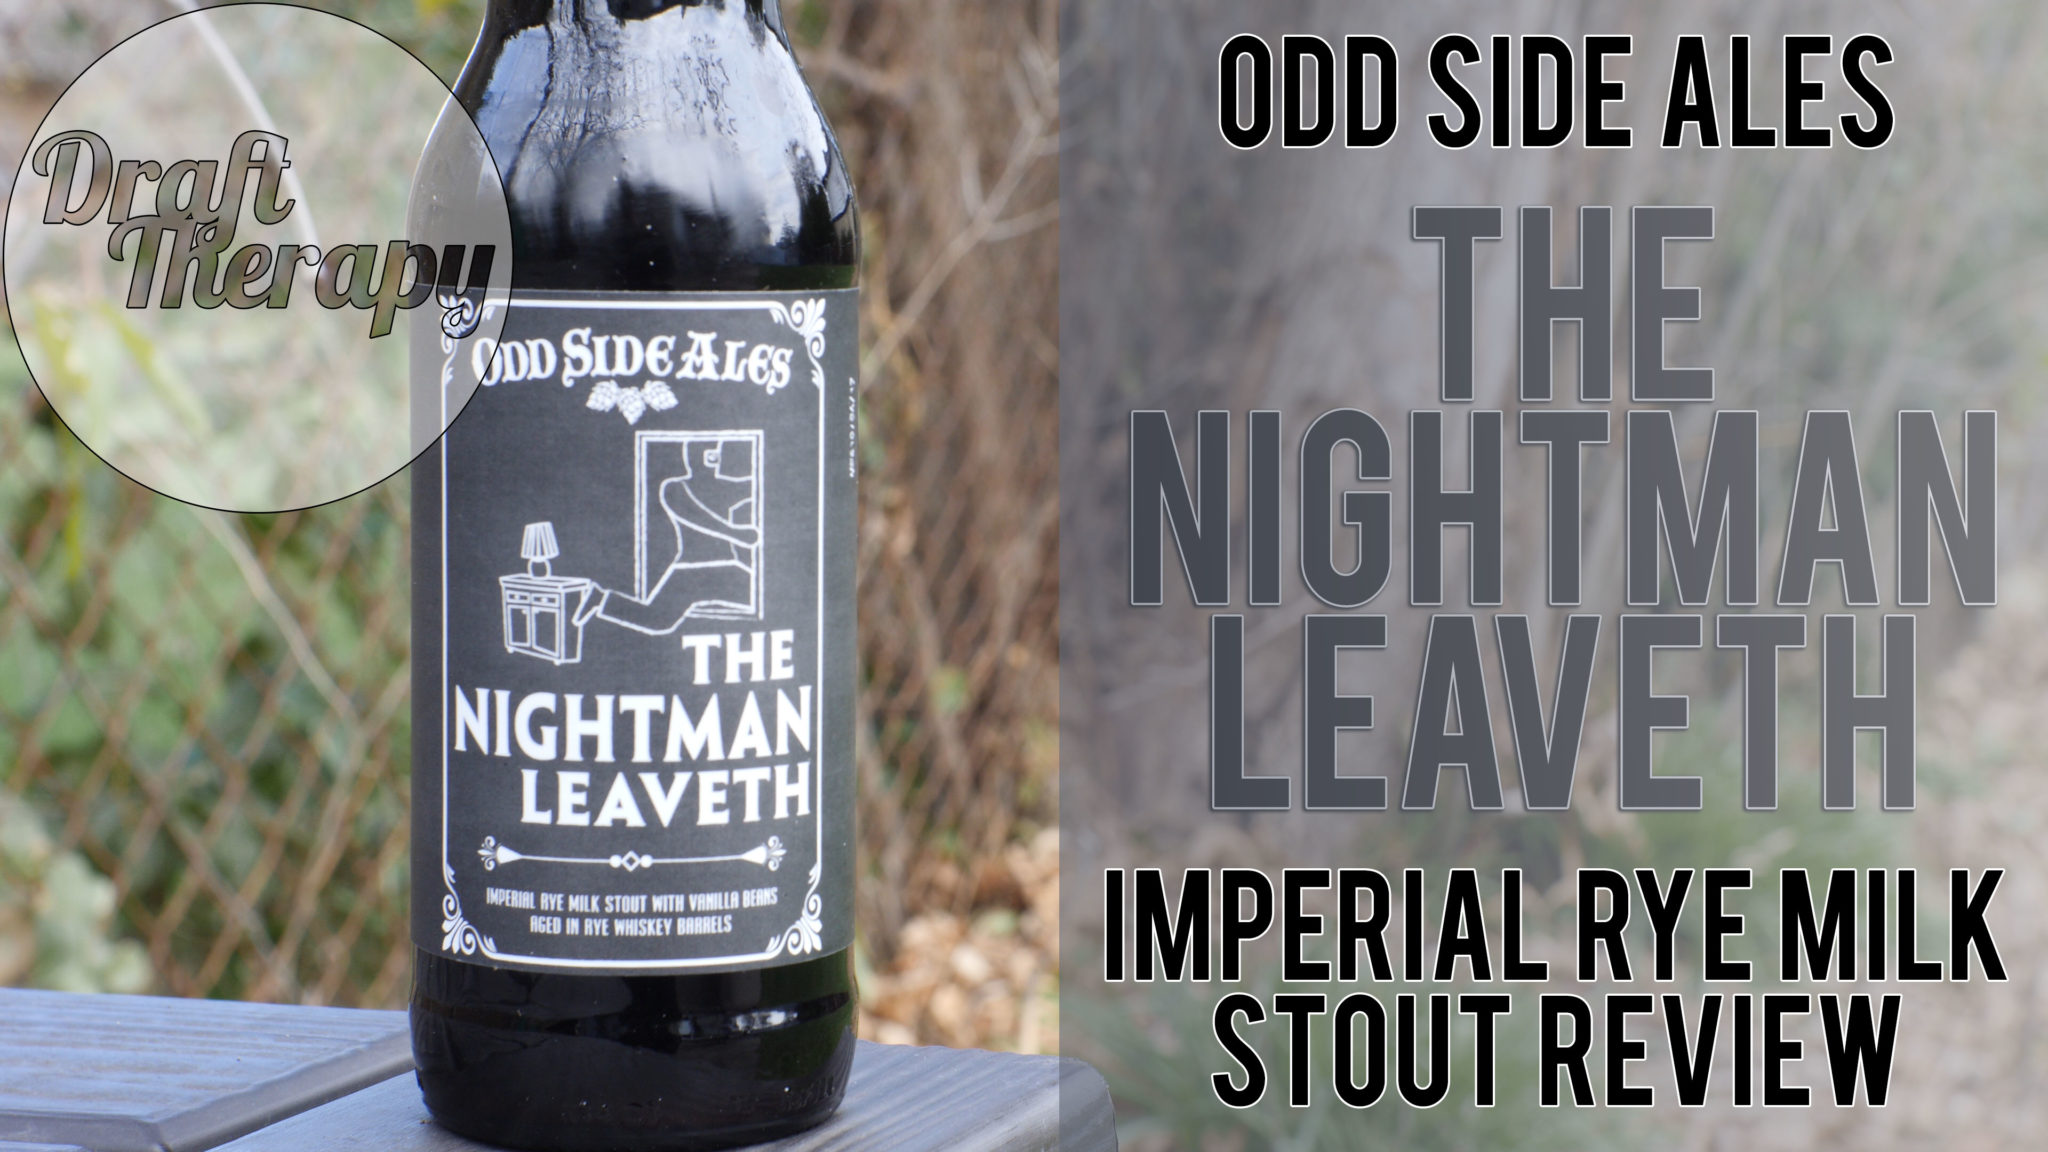 You are currently viewing Odd Side Ales – The Nightman Leaveth Imperial Rye Milk Stout Review